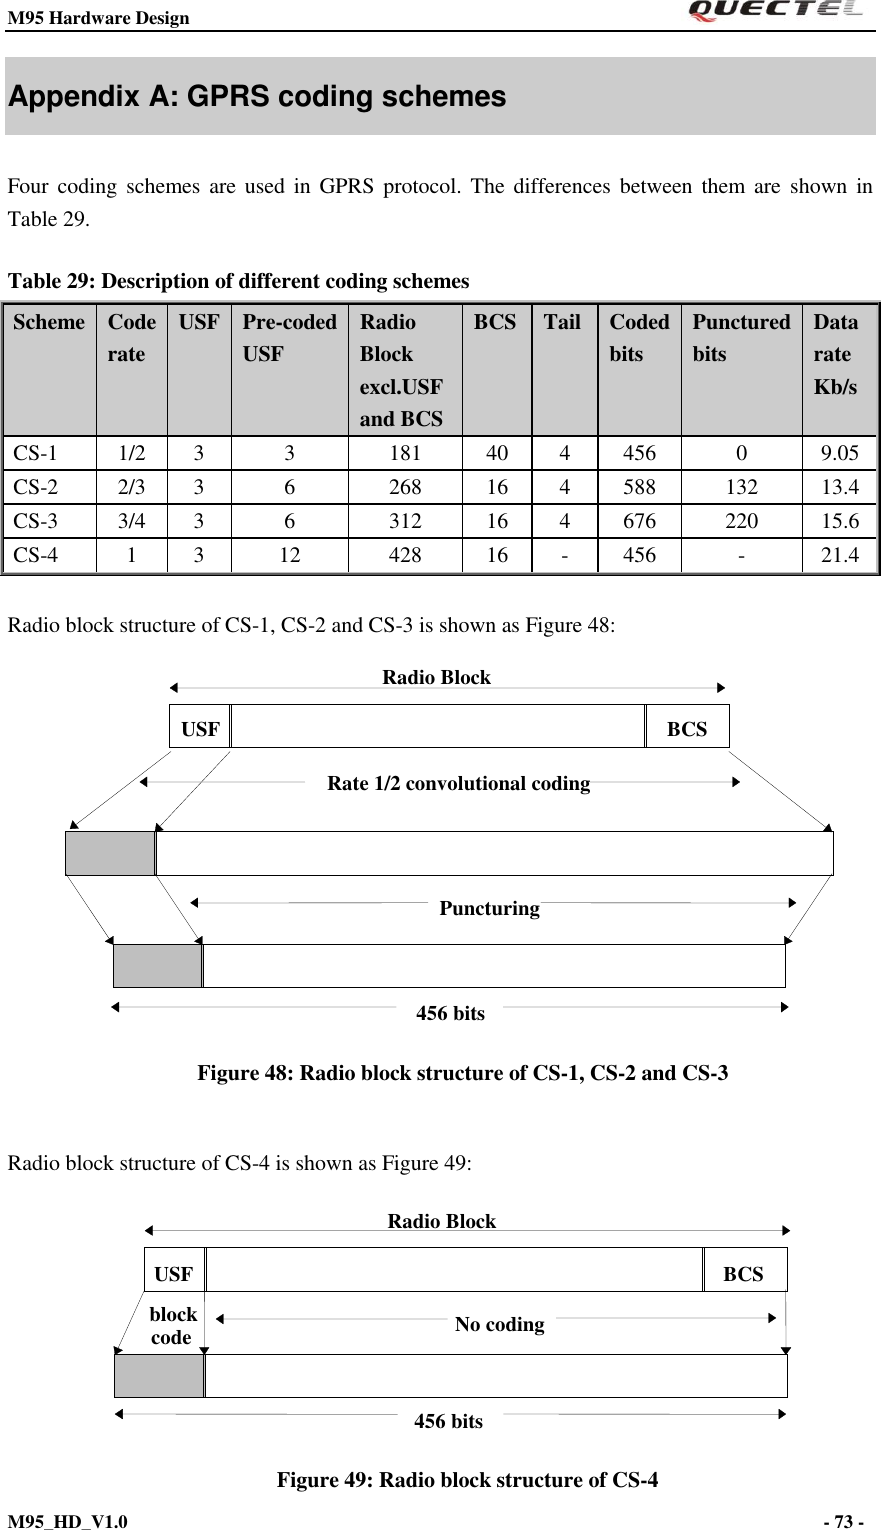 M95 Hardware Design                                                       M95_HD_V1.0                                                                - 73 -    Appendix A: GPRS coding schemes Four  coding  schemes are  used  in  GPRS  protocol. The  differences between them are  shown  in Table 29. Table 29: Description of different coding schemes Scheme Code rate USF Pre-coded USF Radio Block excl.USF and BCS BCS Tail Coded bits Punctured bits Data rate Kb/s CS-1 1/2 3 3 181 40 4 456 0 9.05 CS-2 2/3 3 6 268 16 4 588 132 13.4 CS-3 3/4 3 6 312 16 4 676 220 15.6 CS-4 1 3 12 428 16 - 456 - 21.4  Radio block structure of CS-1, CS-2 and CS-3 is shown as Figure 48:                  Figure 48: Radio block structure of CS-1, CS-2 and CS-3  Radio block structure of CS-4 is shown as Figure 49:                  Figure 49: Radio block structure of CS-4 Rate 1/2 convolutional coding Puncturing 456 bits USF BCS Radio Block block code No coding USF BCS Radio Block 456 bits 